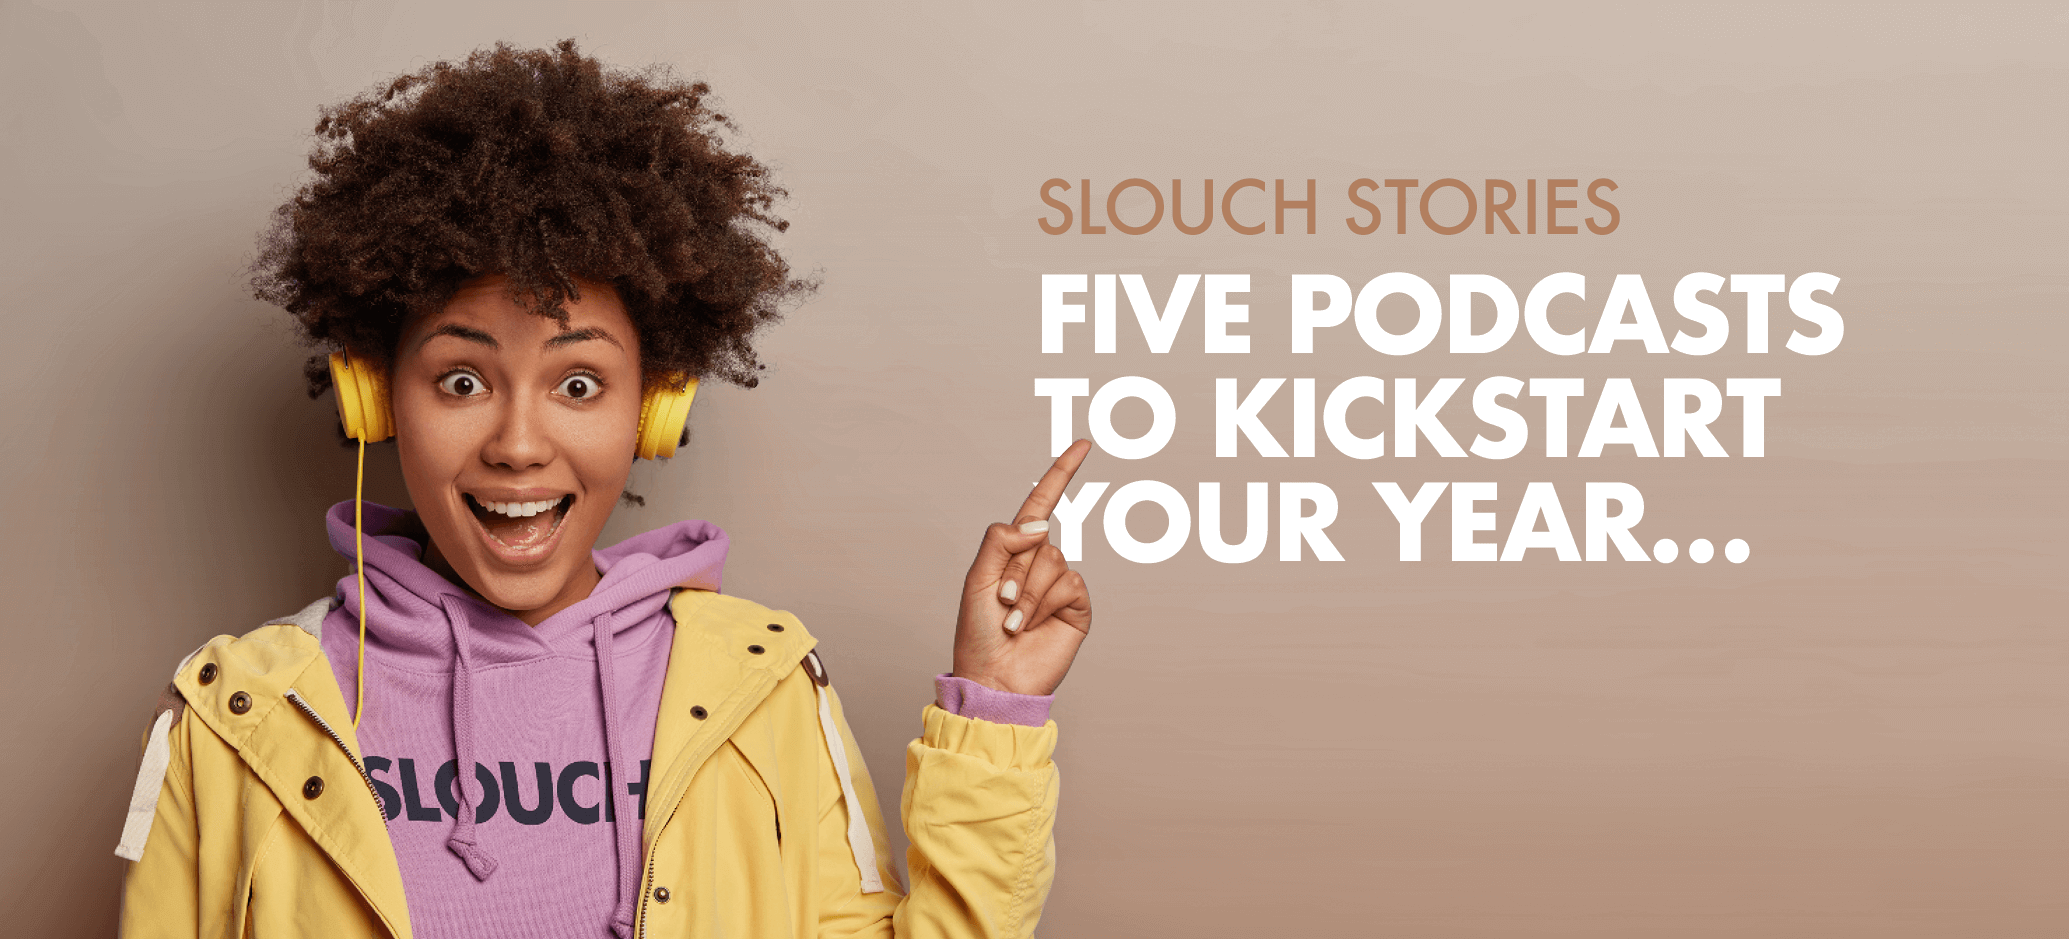 Five Podcasts to Kickstart Your Year Featured Image